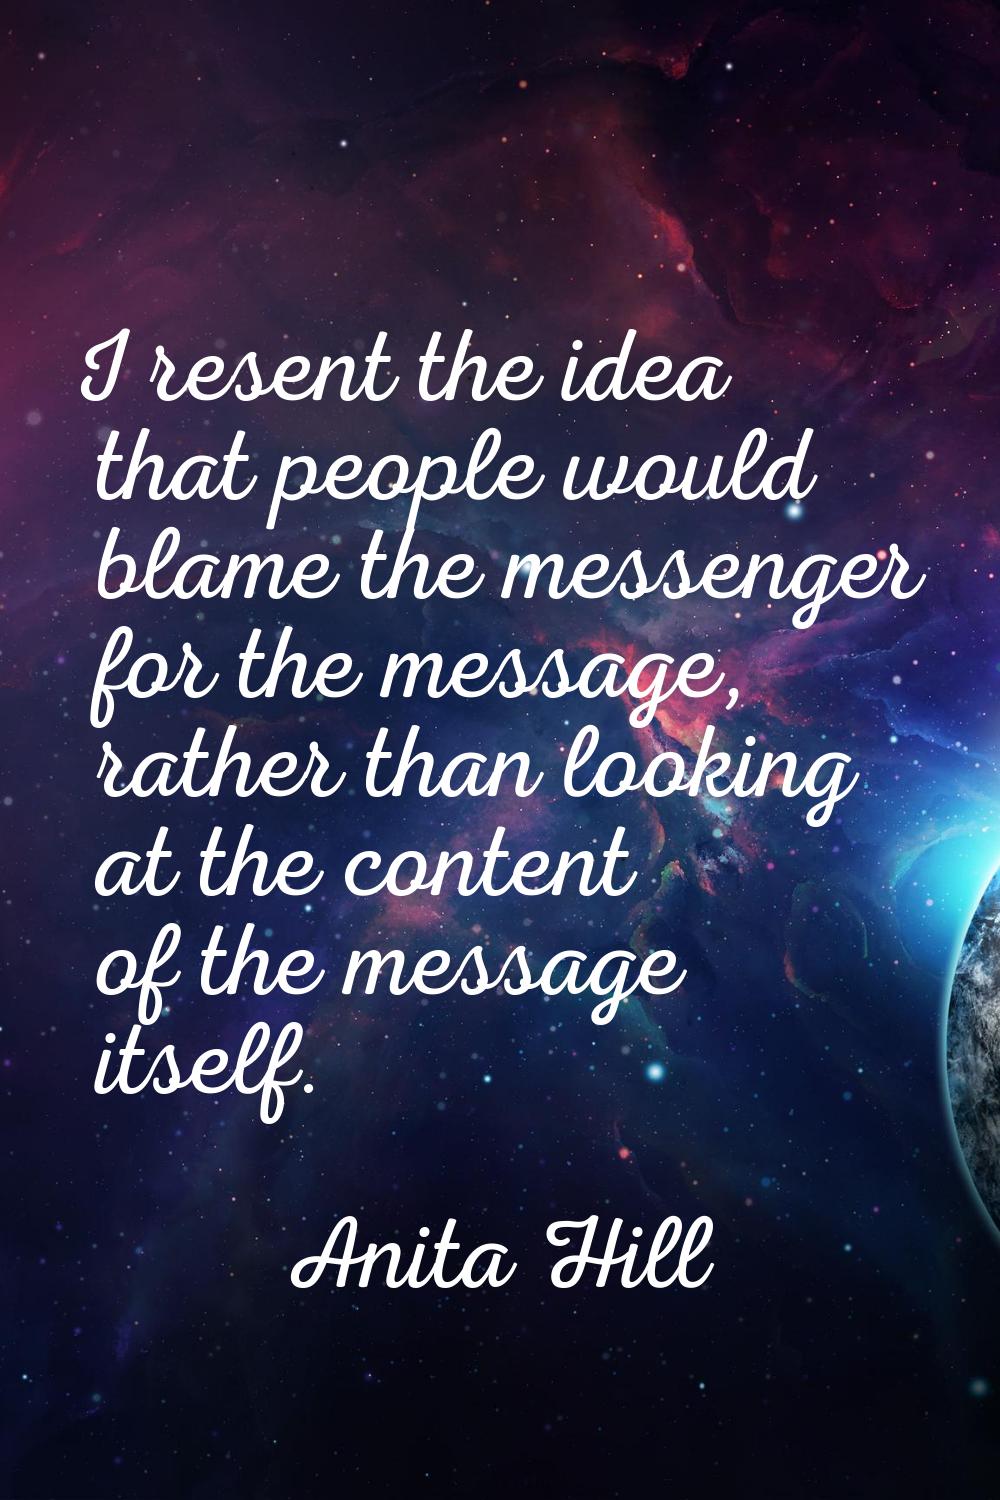 I resent the idea that people would blame the messenger for the message, rather than looking at the